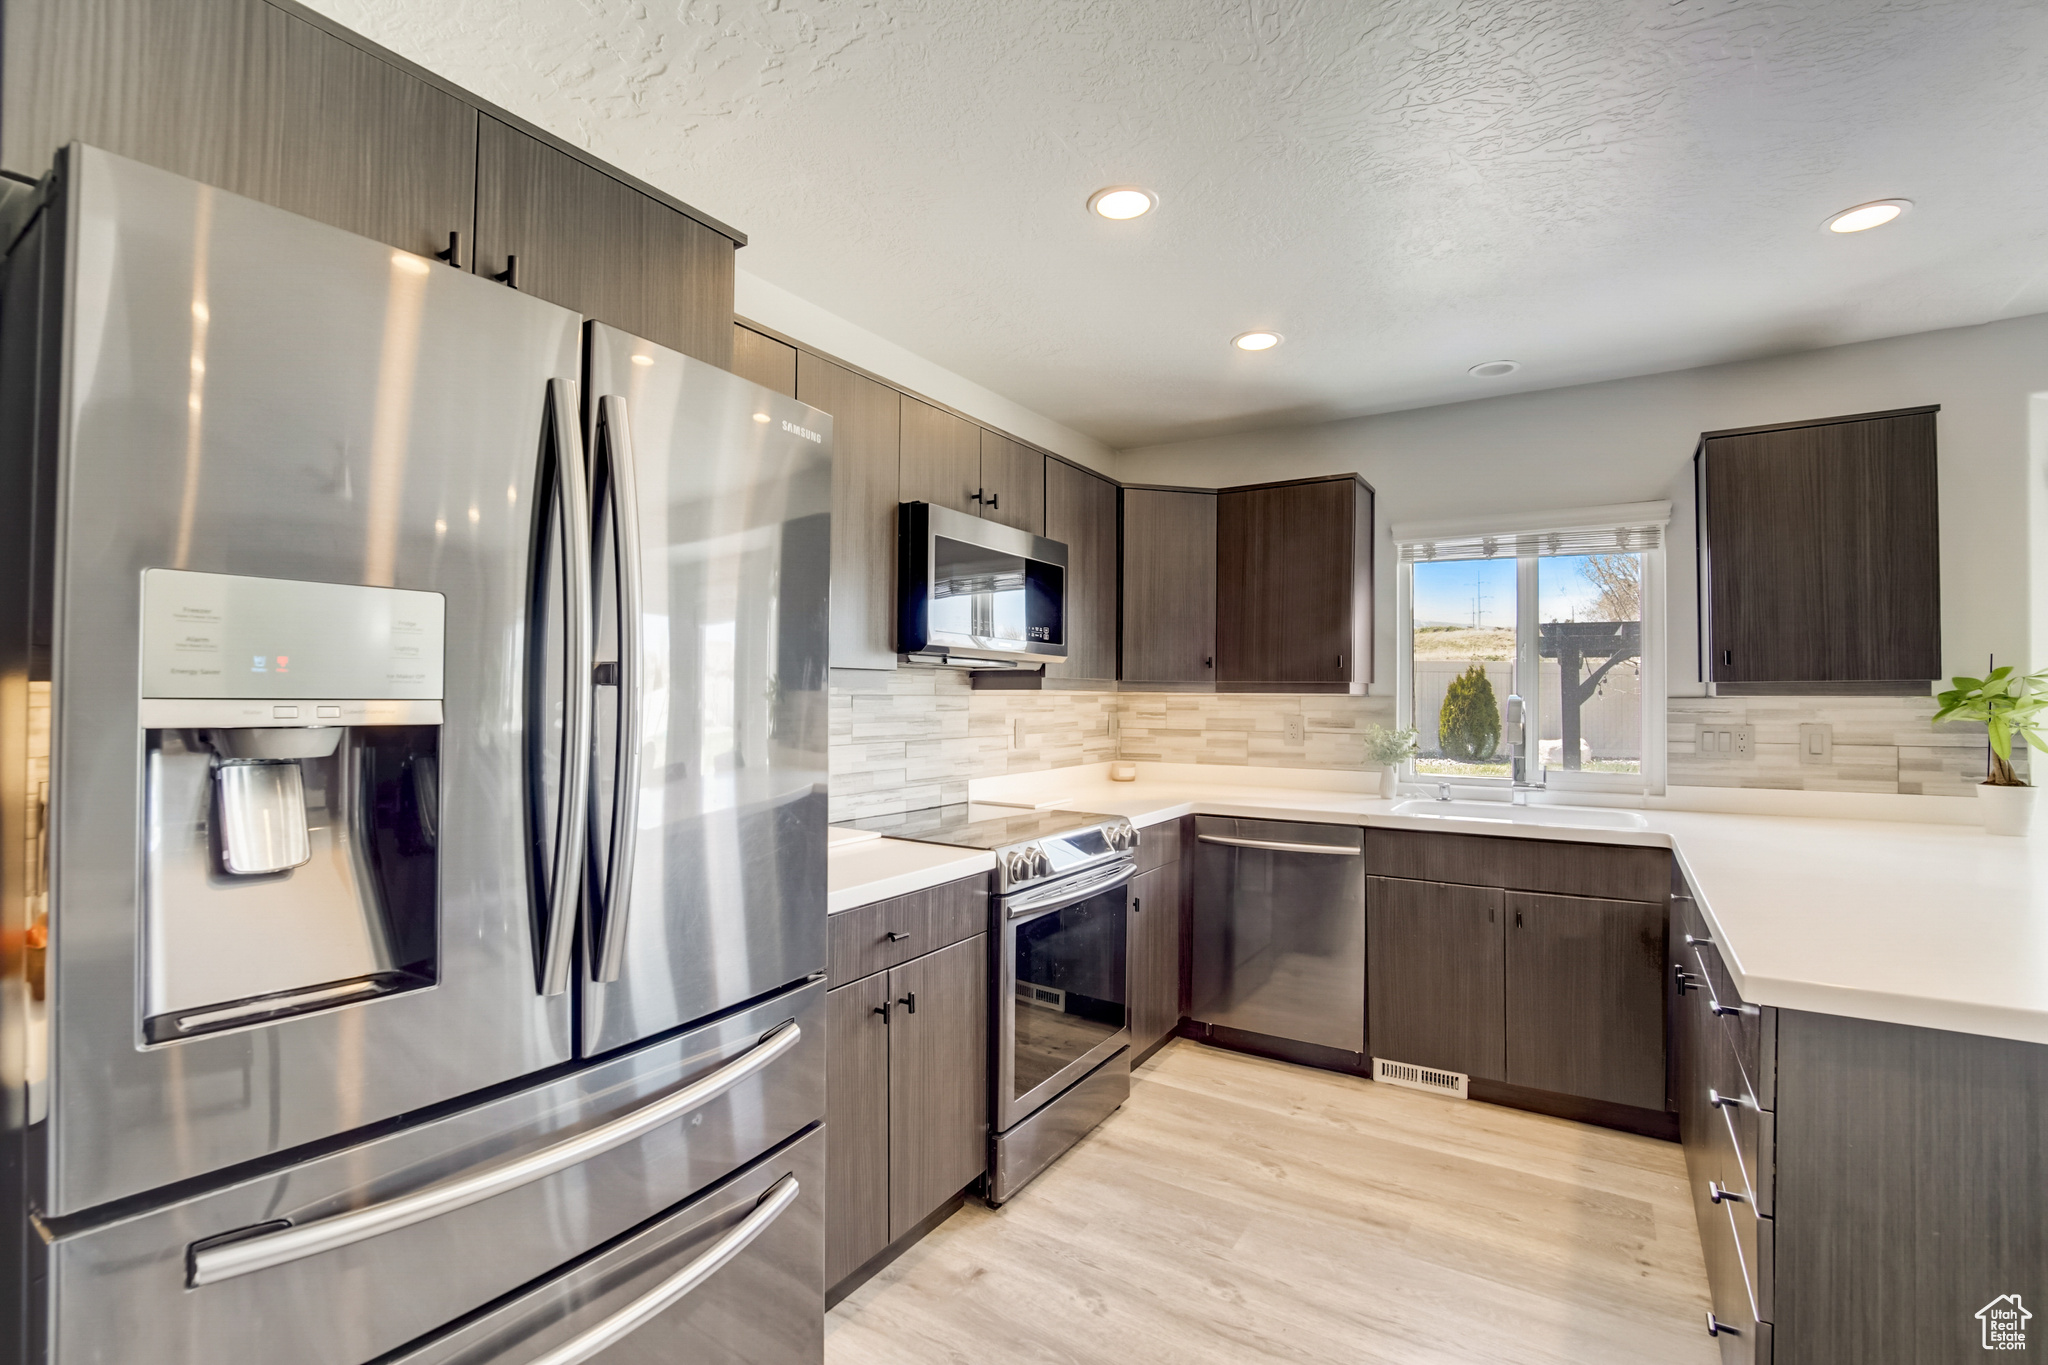 Kitchen featuring appliances with stainless steel finishes, tasteful backsplash, light hardwood / wood-style floors, and sink